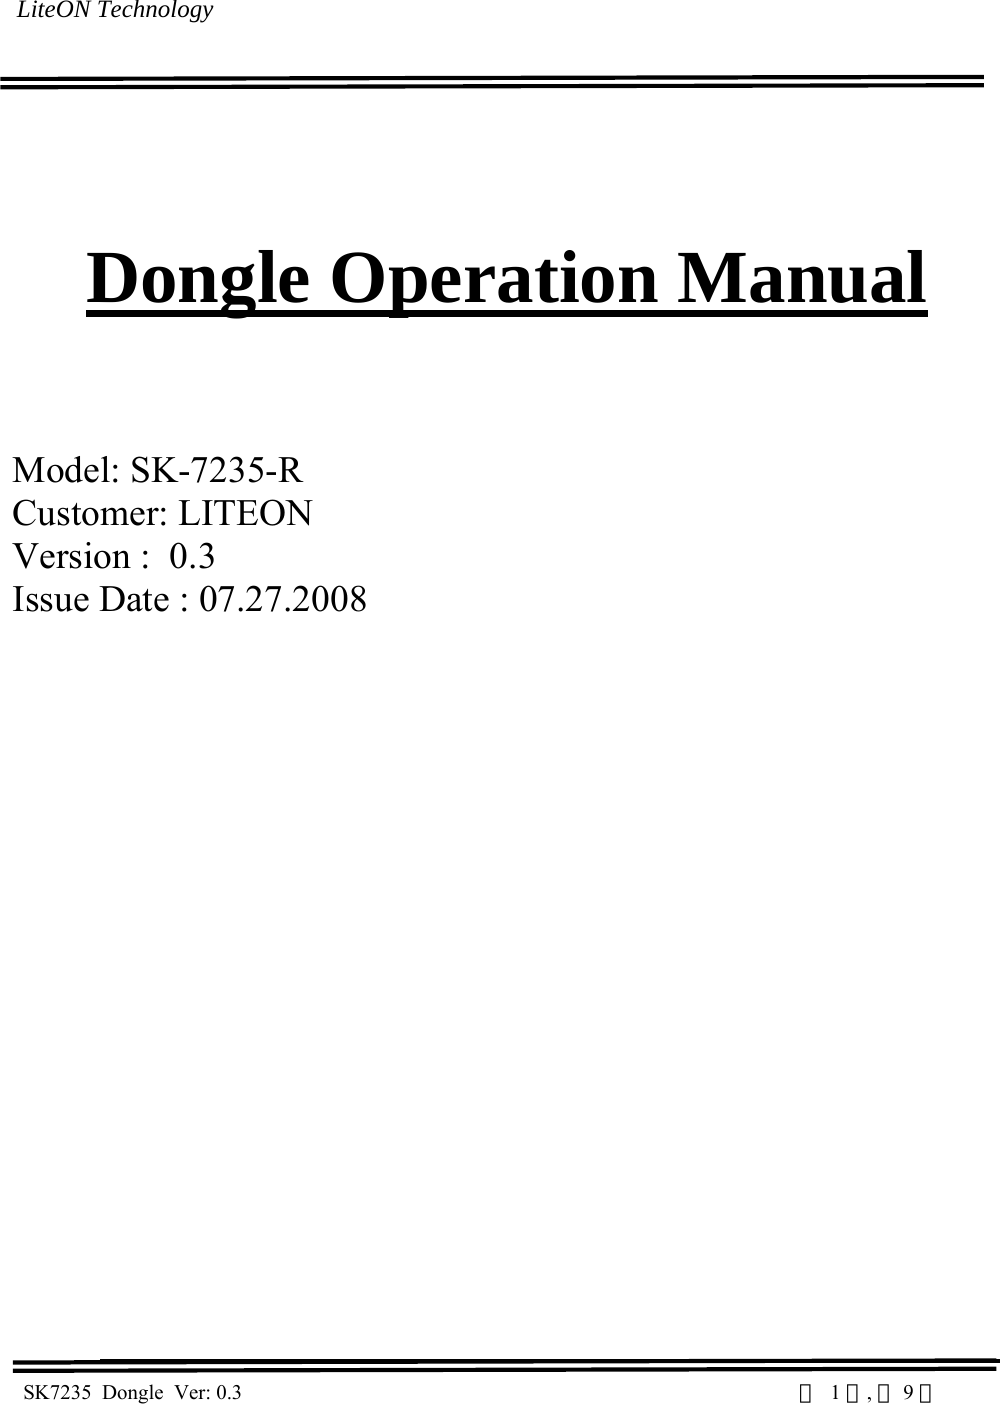  LiteON Technology                                                                                                                                                                                                                                                                                          SK7235  Dongle  Ver: 0.3                                                                                                           第  1 頁, 共 9 頁                                     Dongle Operation Manual    Model: SK-7235-R Customer: LITEON  Version :  0.3 Issue Date : 07.27.2008                       